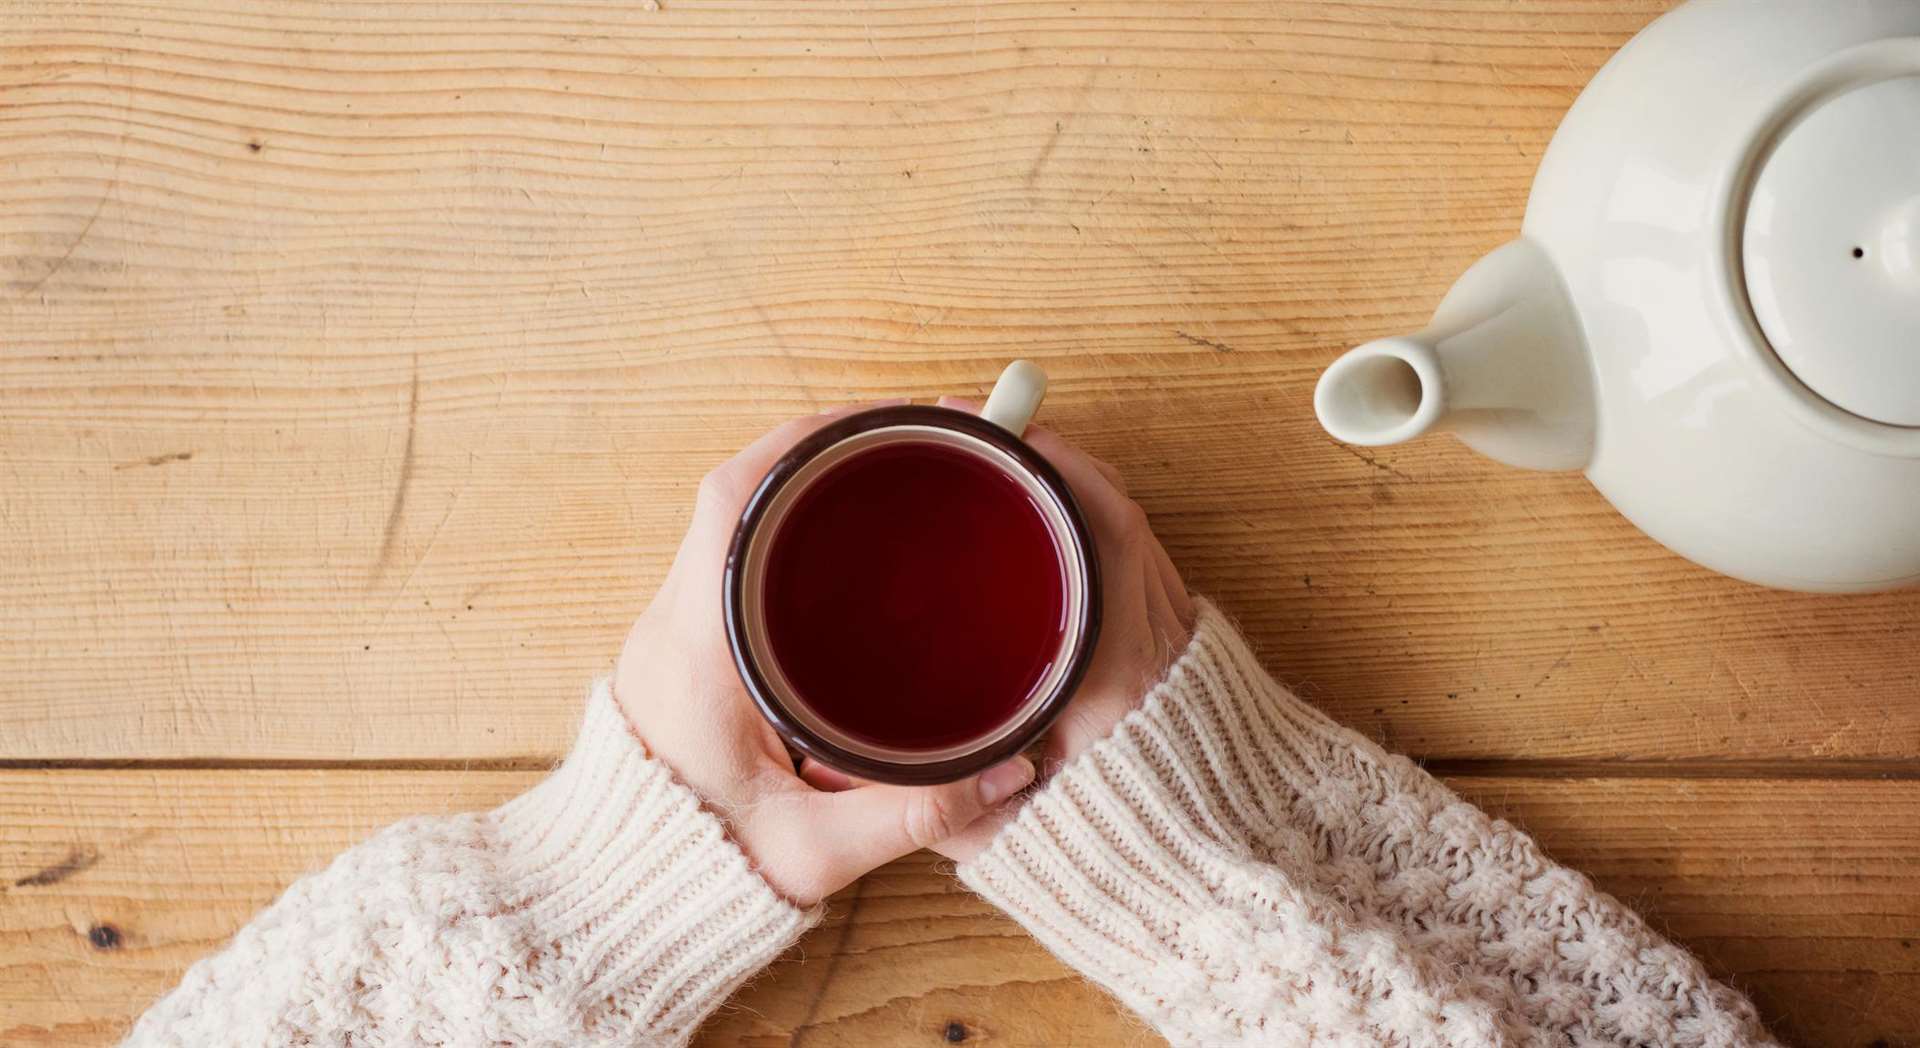 Blends for Friends have brewed up between 25,000 and 30,000 unique recipes of tea.